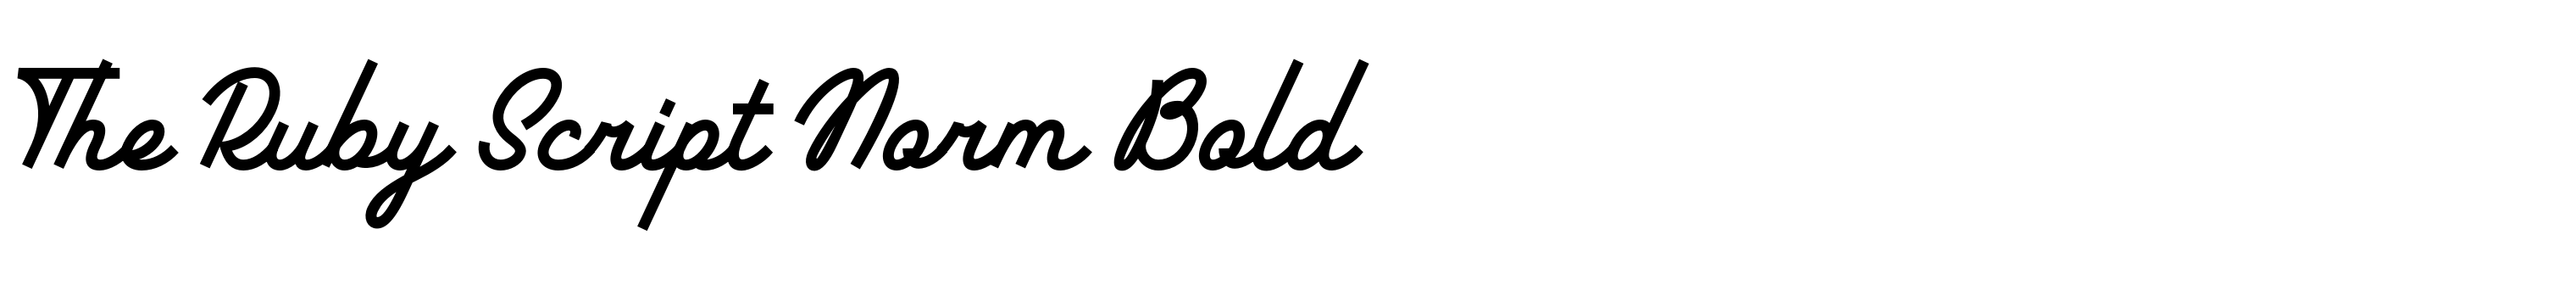 The Ruby Script Norm Bold